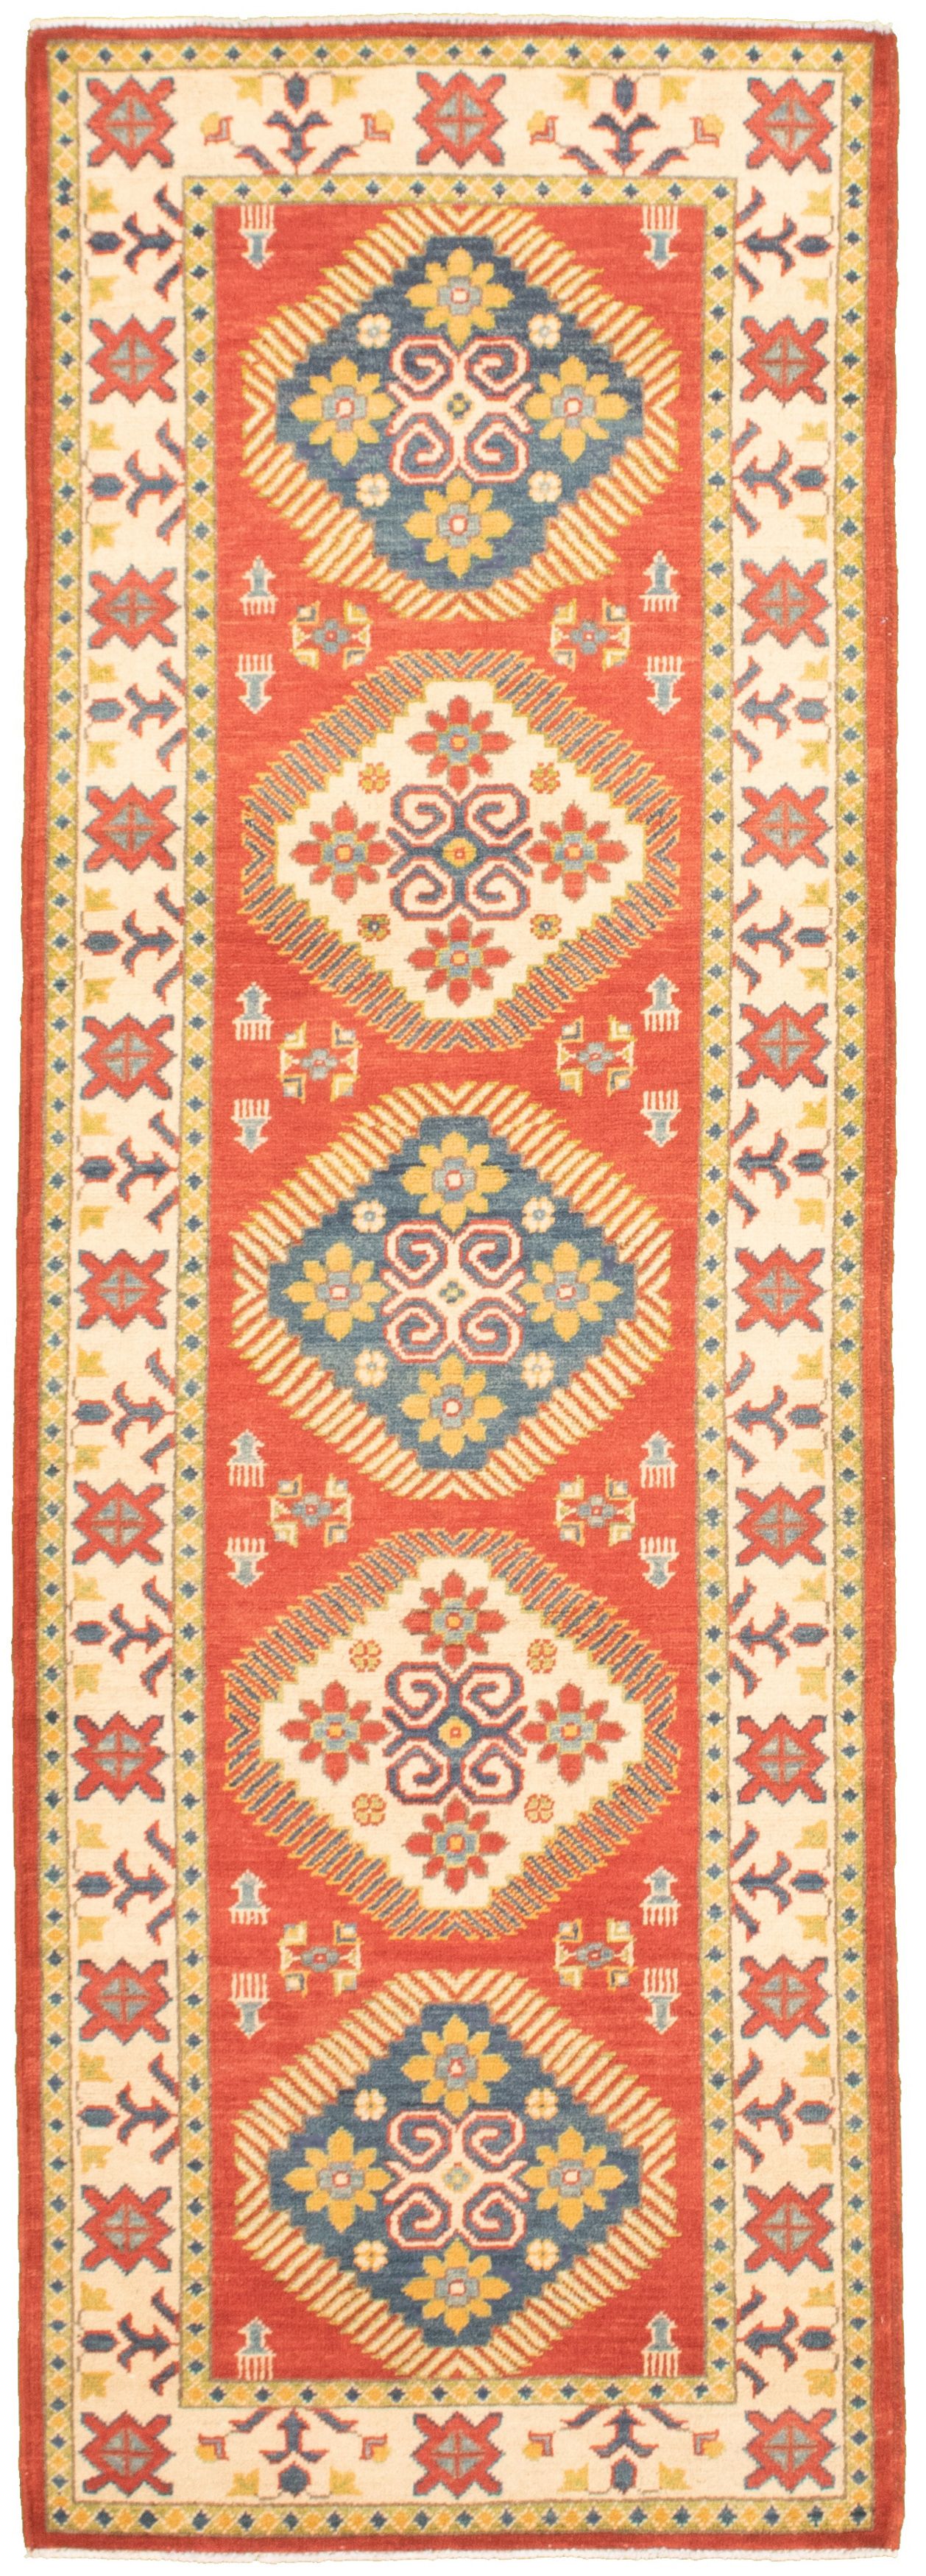 Hand-knotted Finest Gazni Red  Rug 2'9" x 8'2" Size: 2'9" x 8'2"  